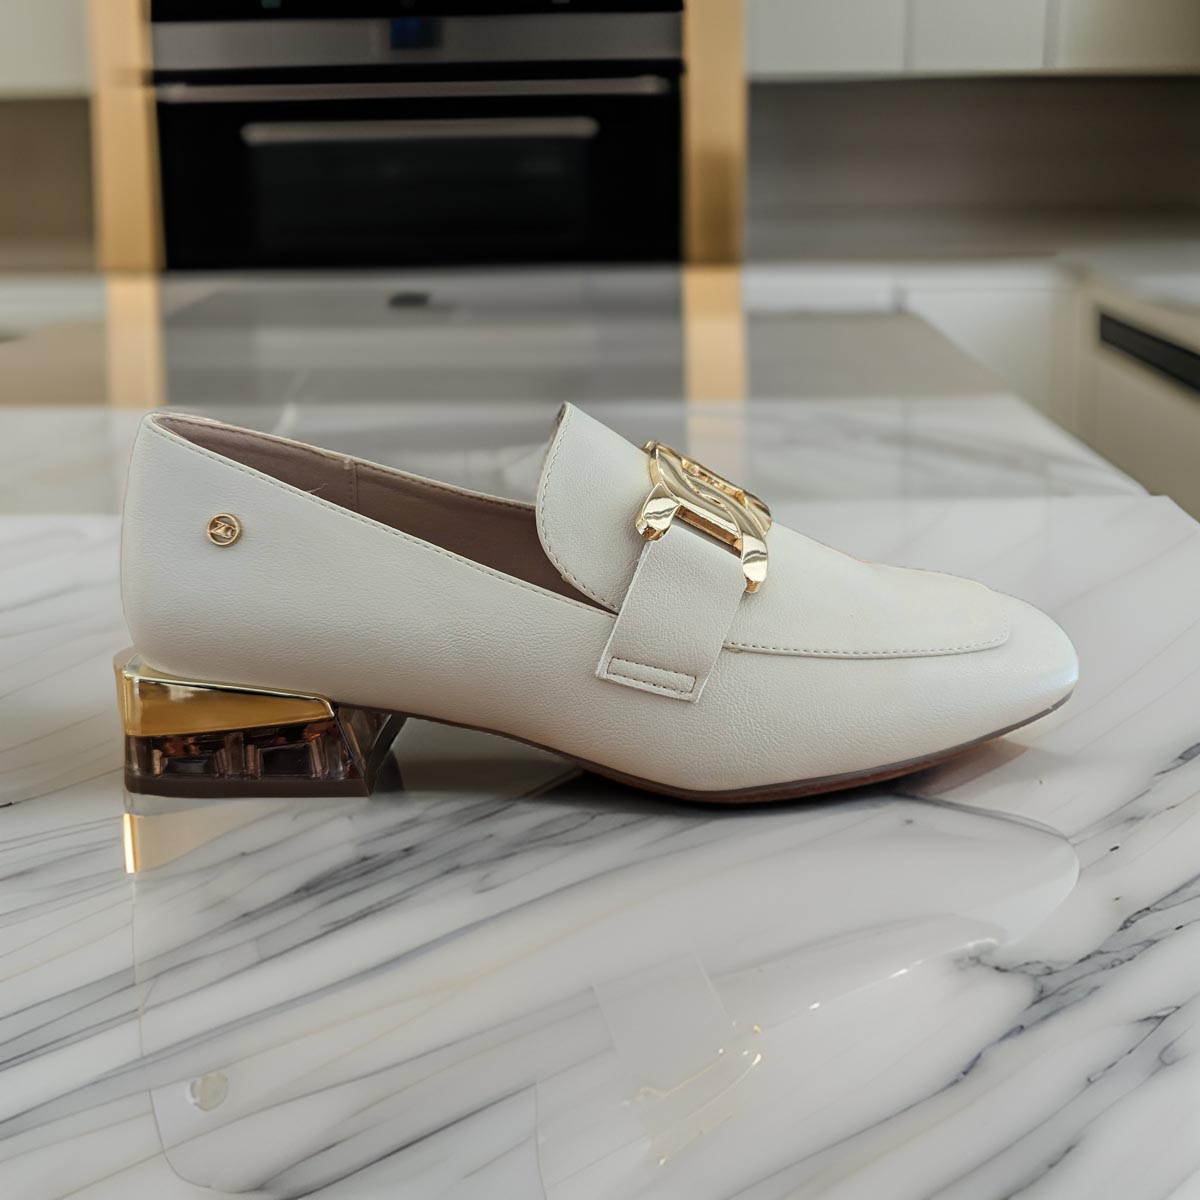     Front view of Zanni & Co Cream Square Toe Loafer showcasing the gold chain link.